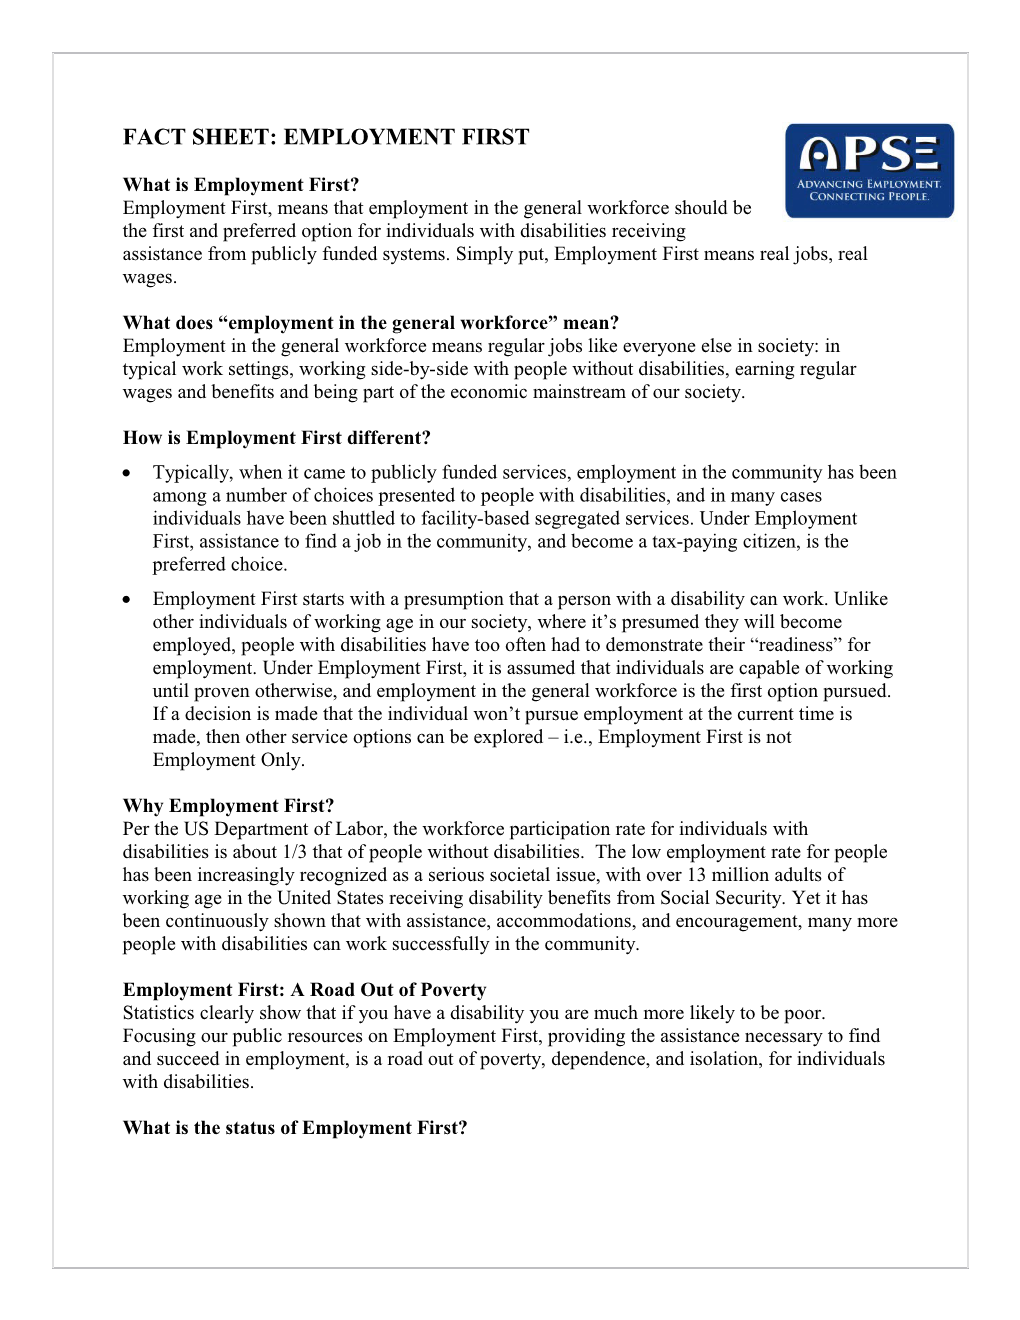 APSE: Employment First Definition and Principles